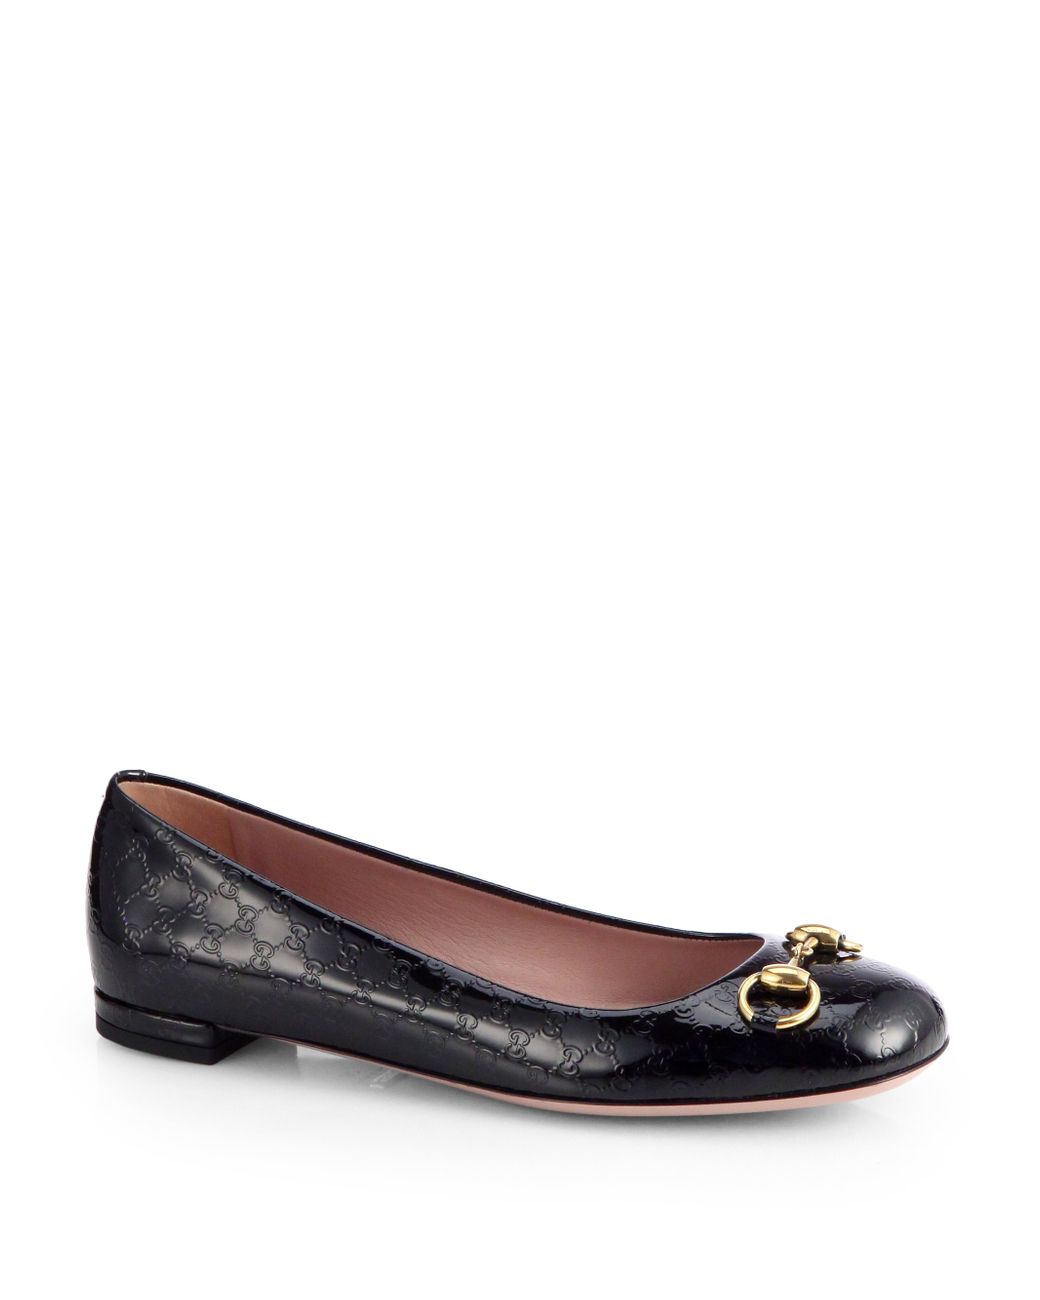 Gucci Jolene Gg Patent Leather Ballet Flats in Black | Lyst